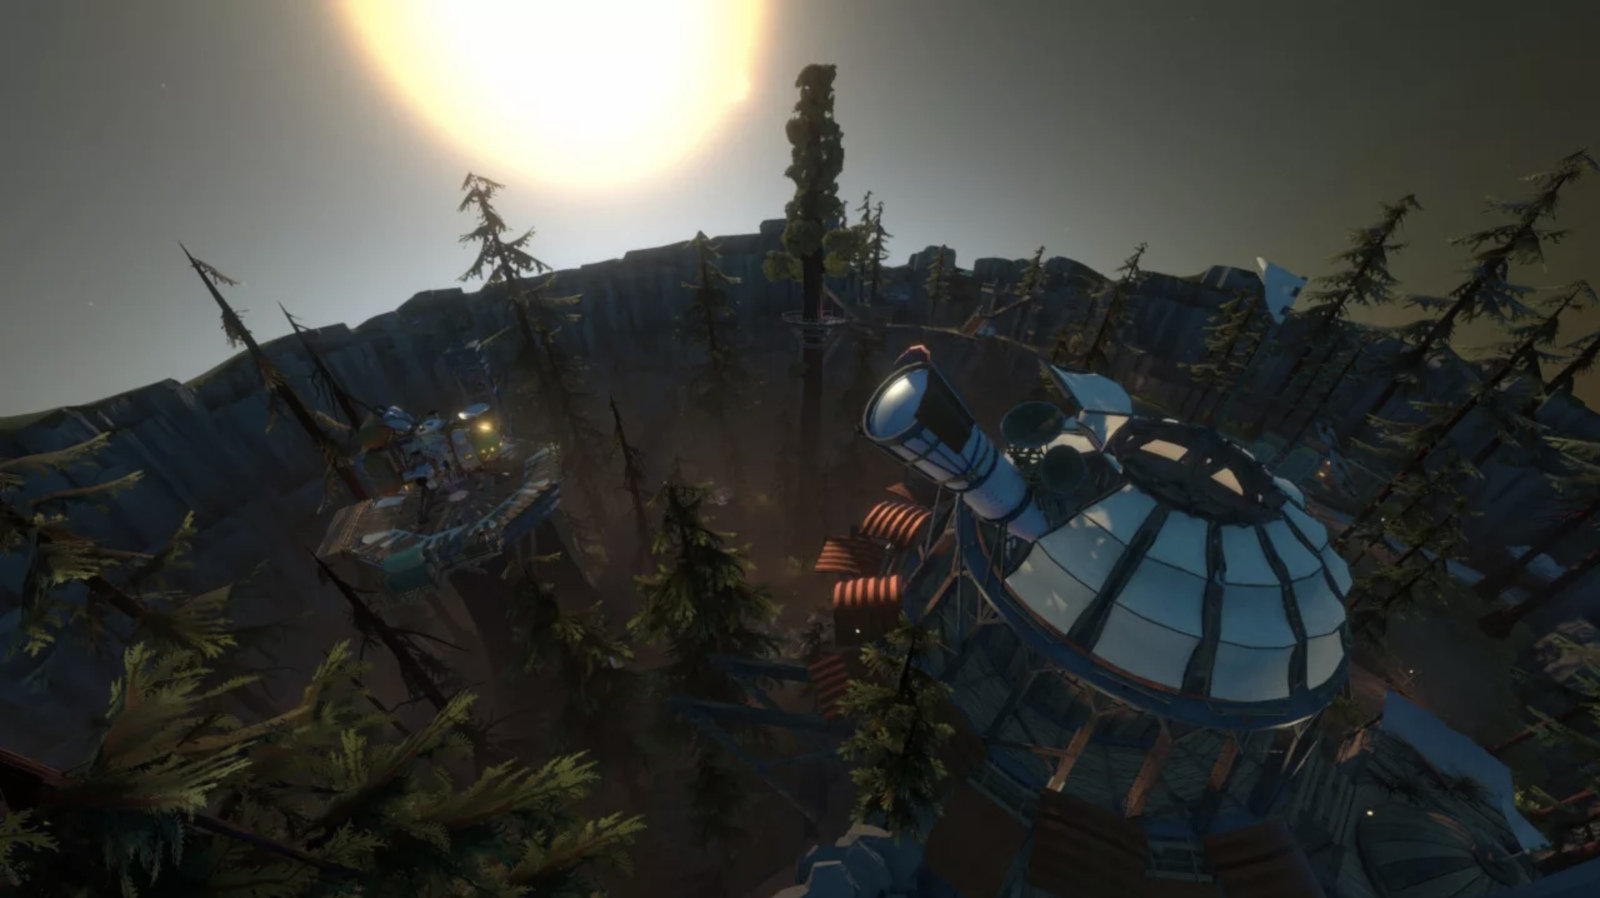 outer wilds arrives on ps4 on October 15